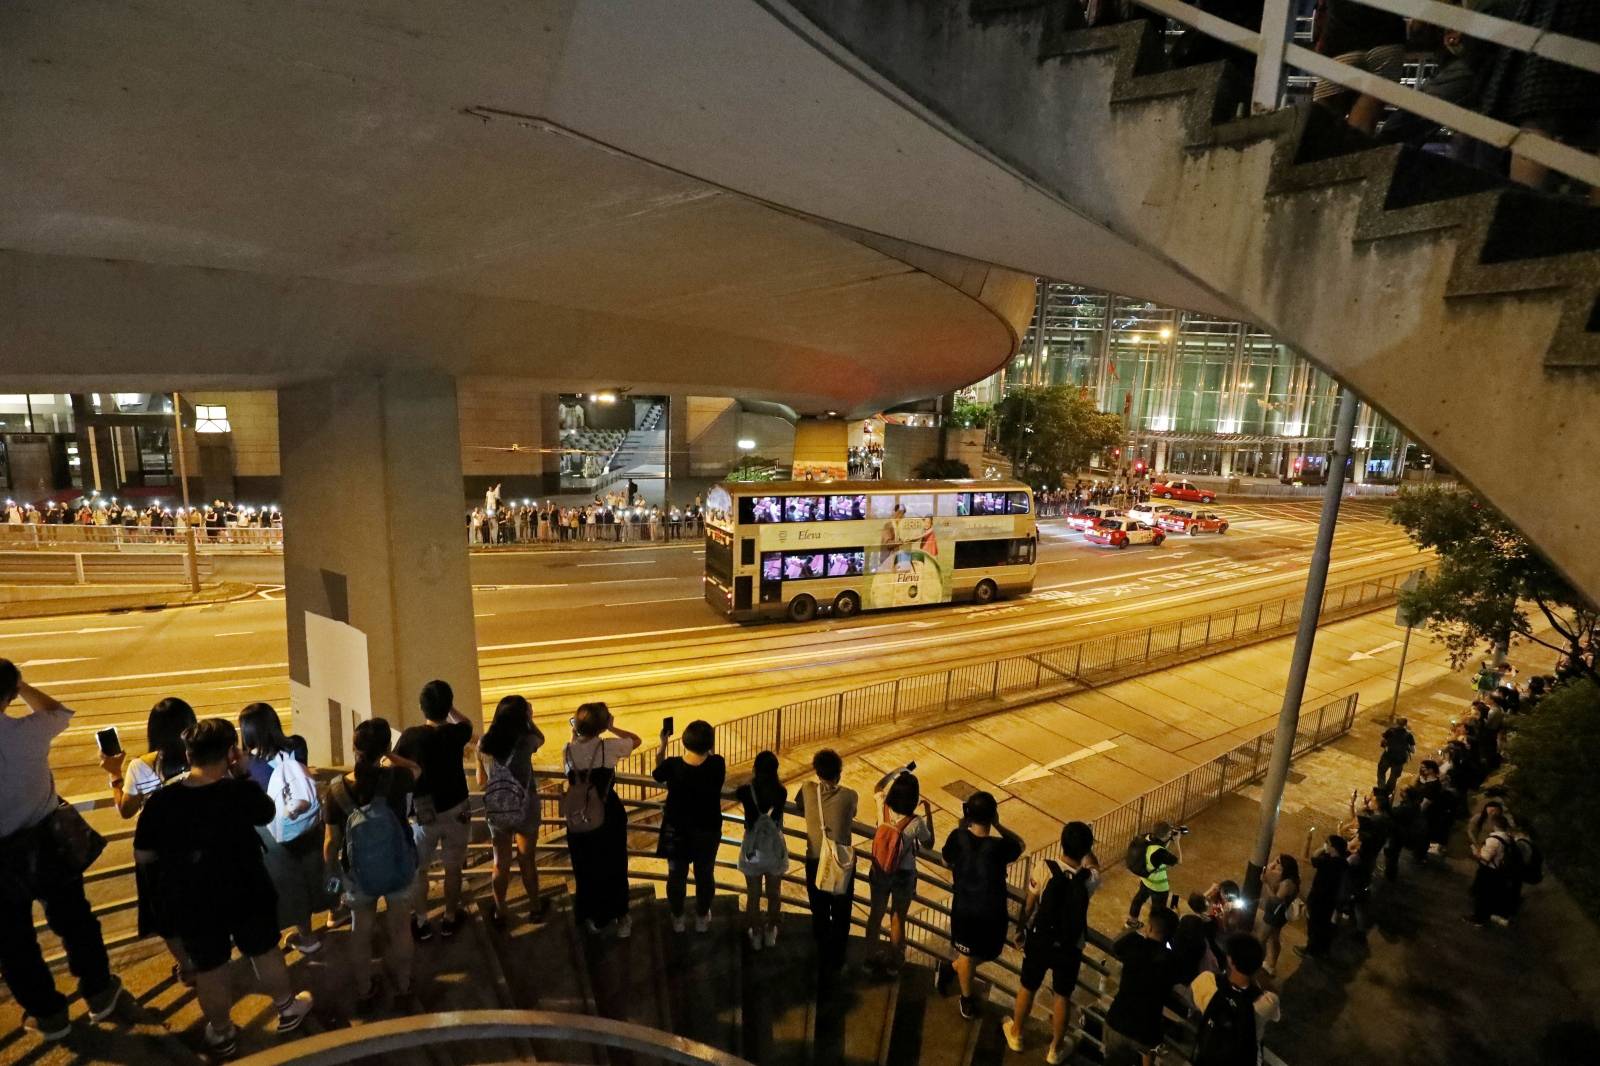 Protesters stand next to each other to form a human chain during a rally to call for political reforms in Hong Kong